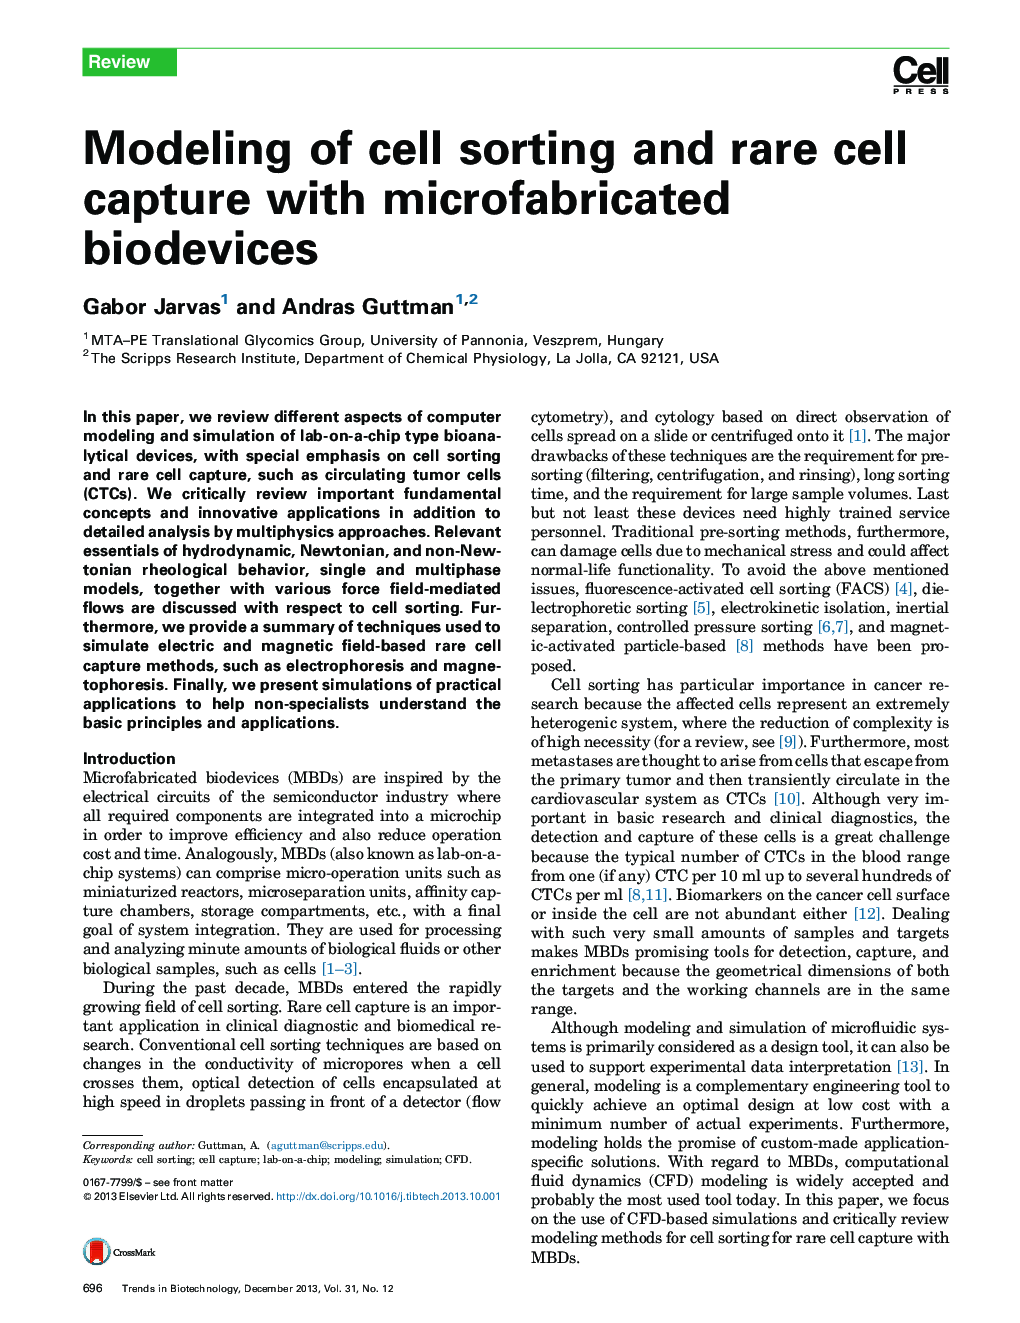 Modeling of cell sorting and rare cell capture with microfabricated biodevices